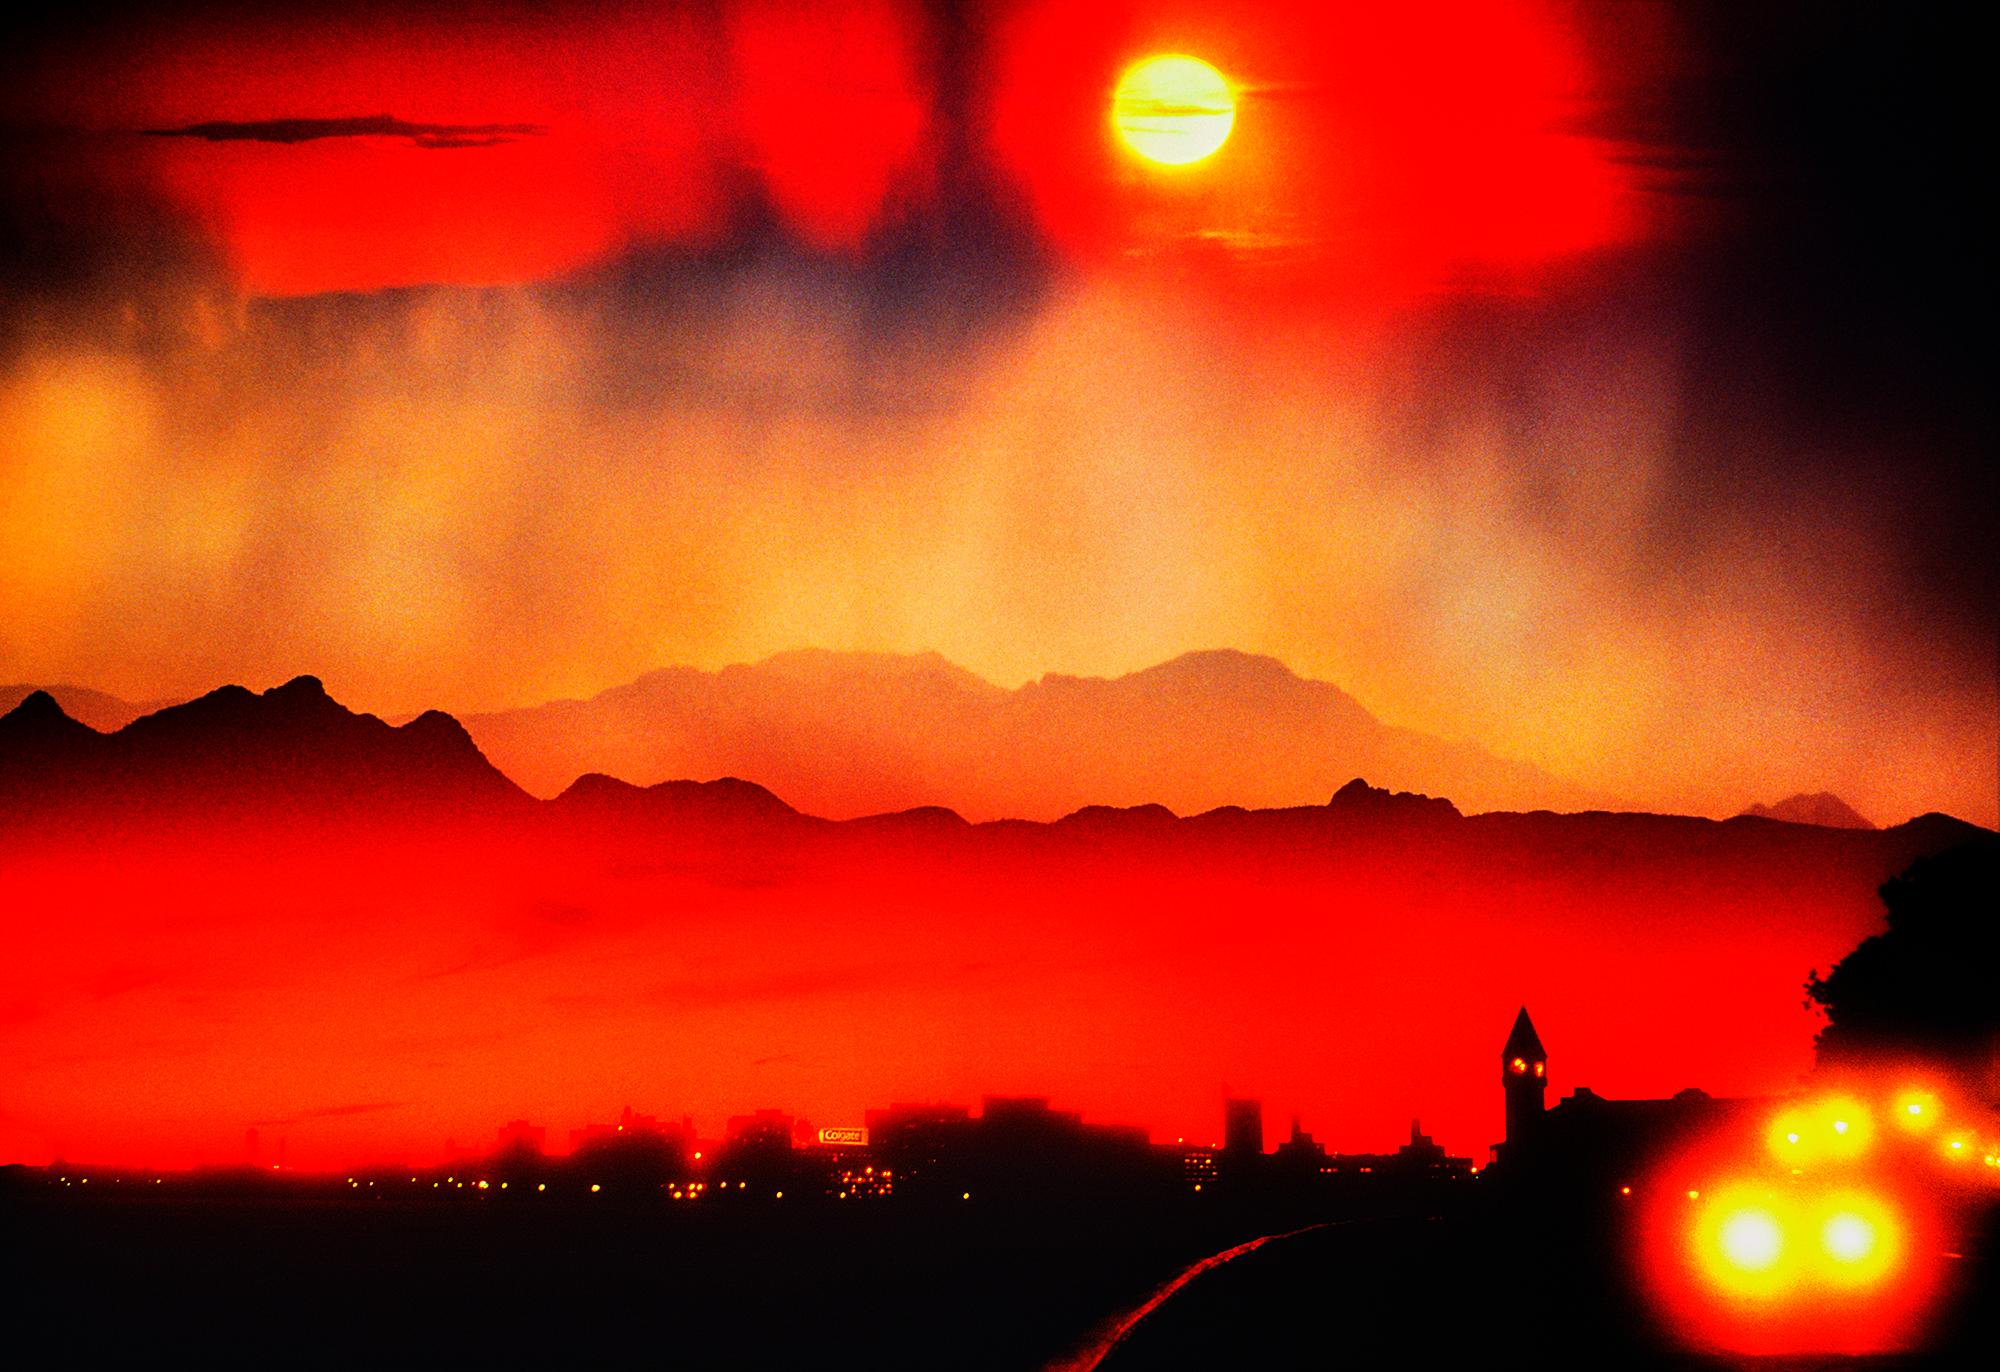 Mitchell Funk Abstract Photograph - Dreamy Romantic Sunset over Ottawa Canada - Red and Oranges